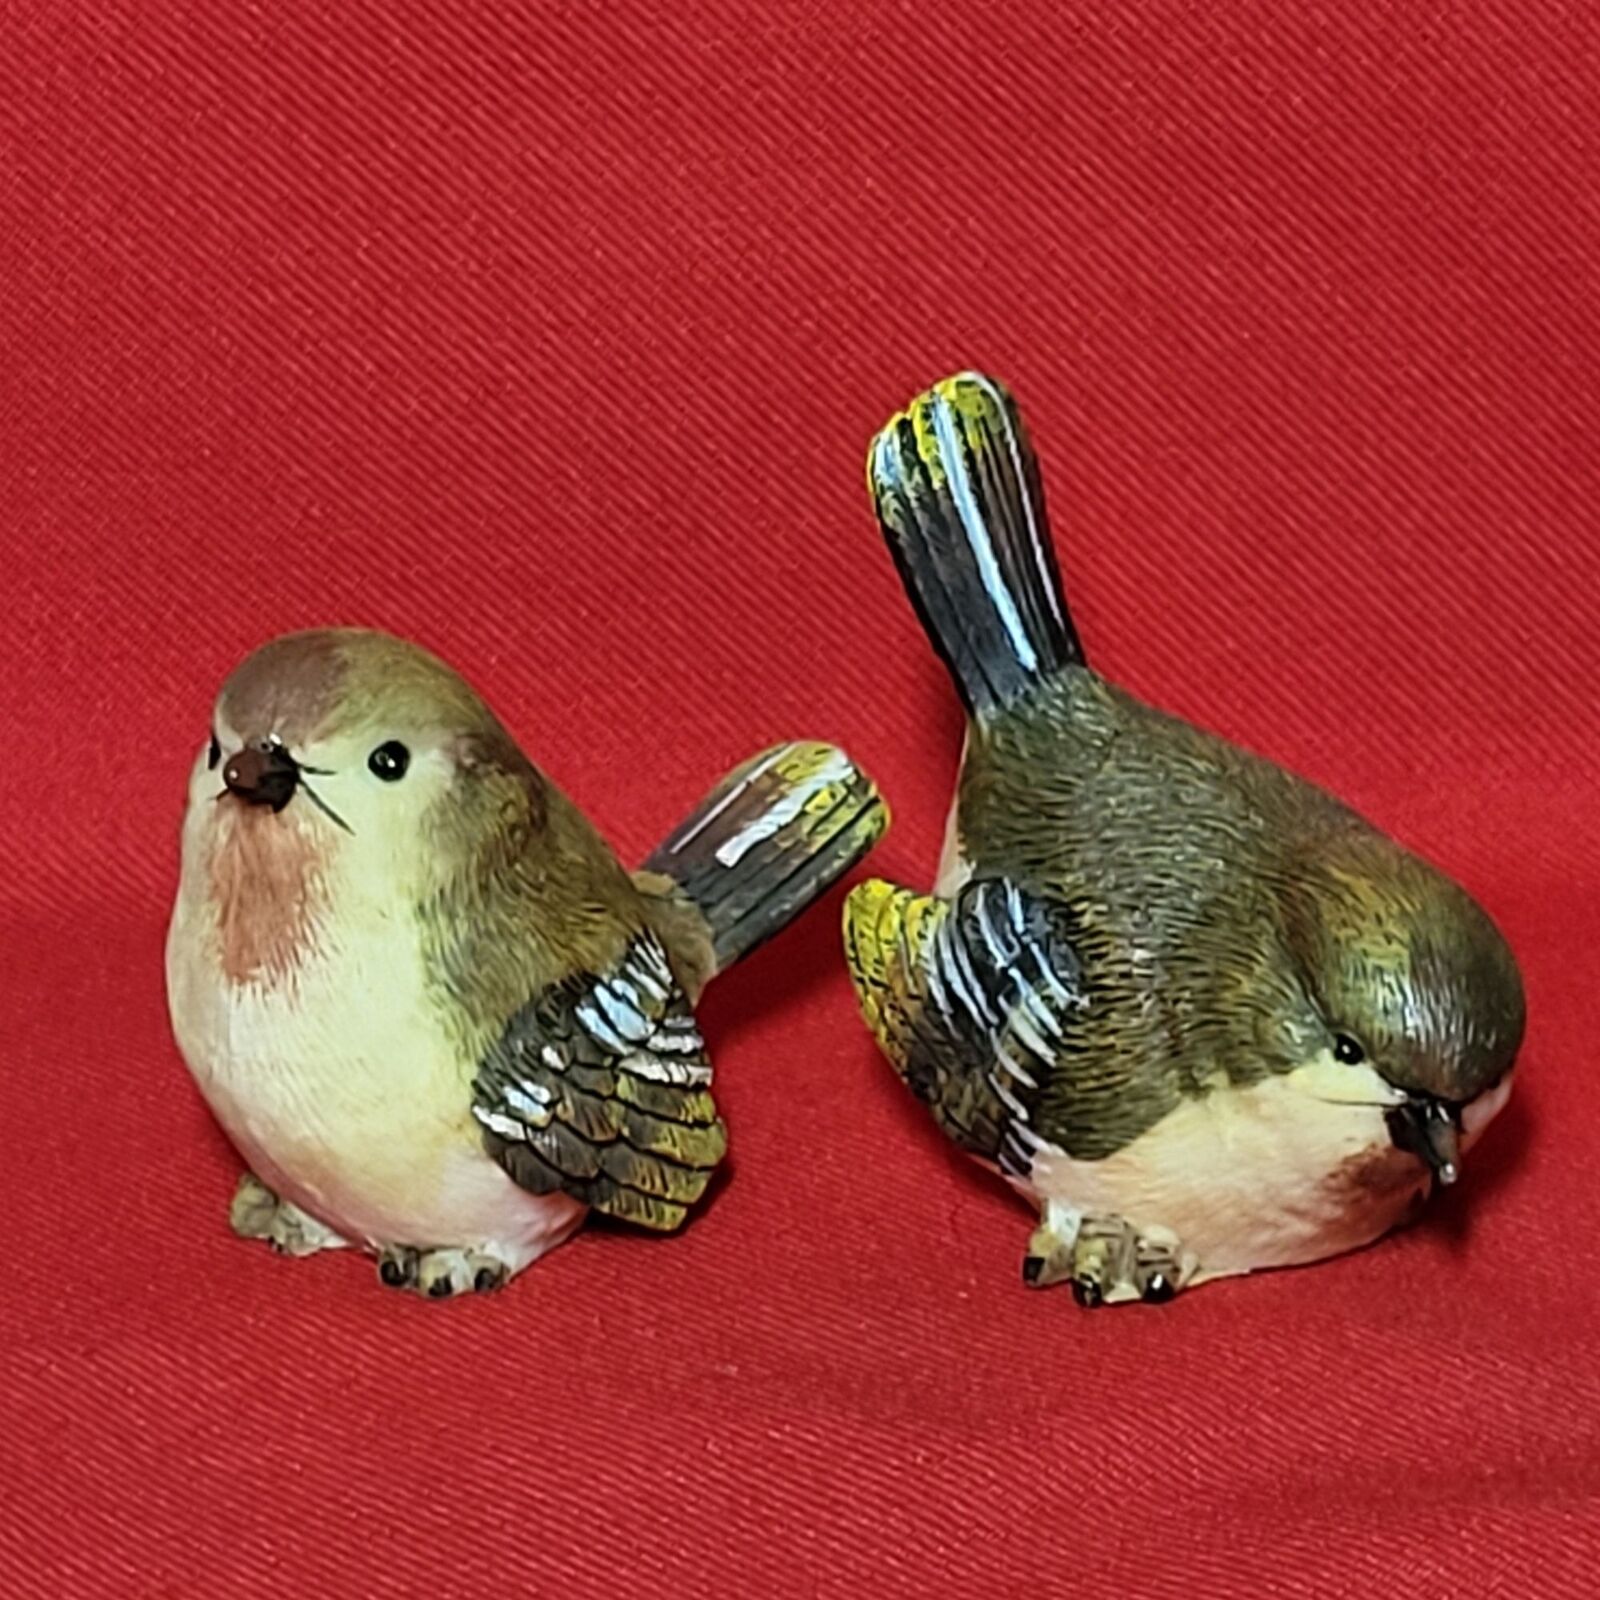 Small Bird Figurines Ruby Crowned Kinglet Birds Green Wood Warbler Finches Set o